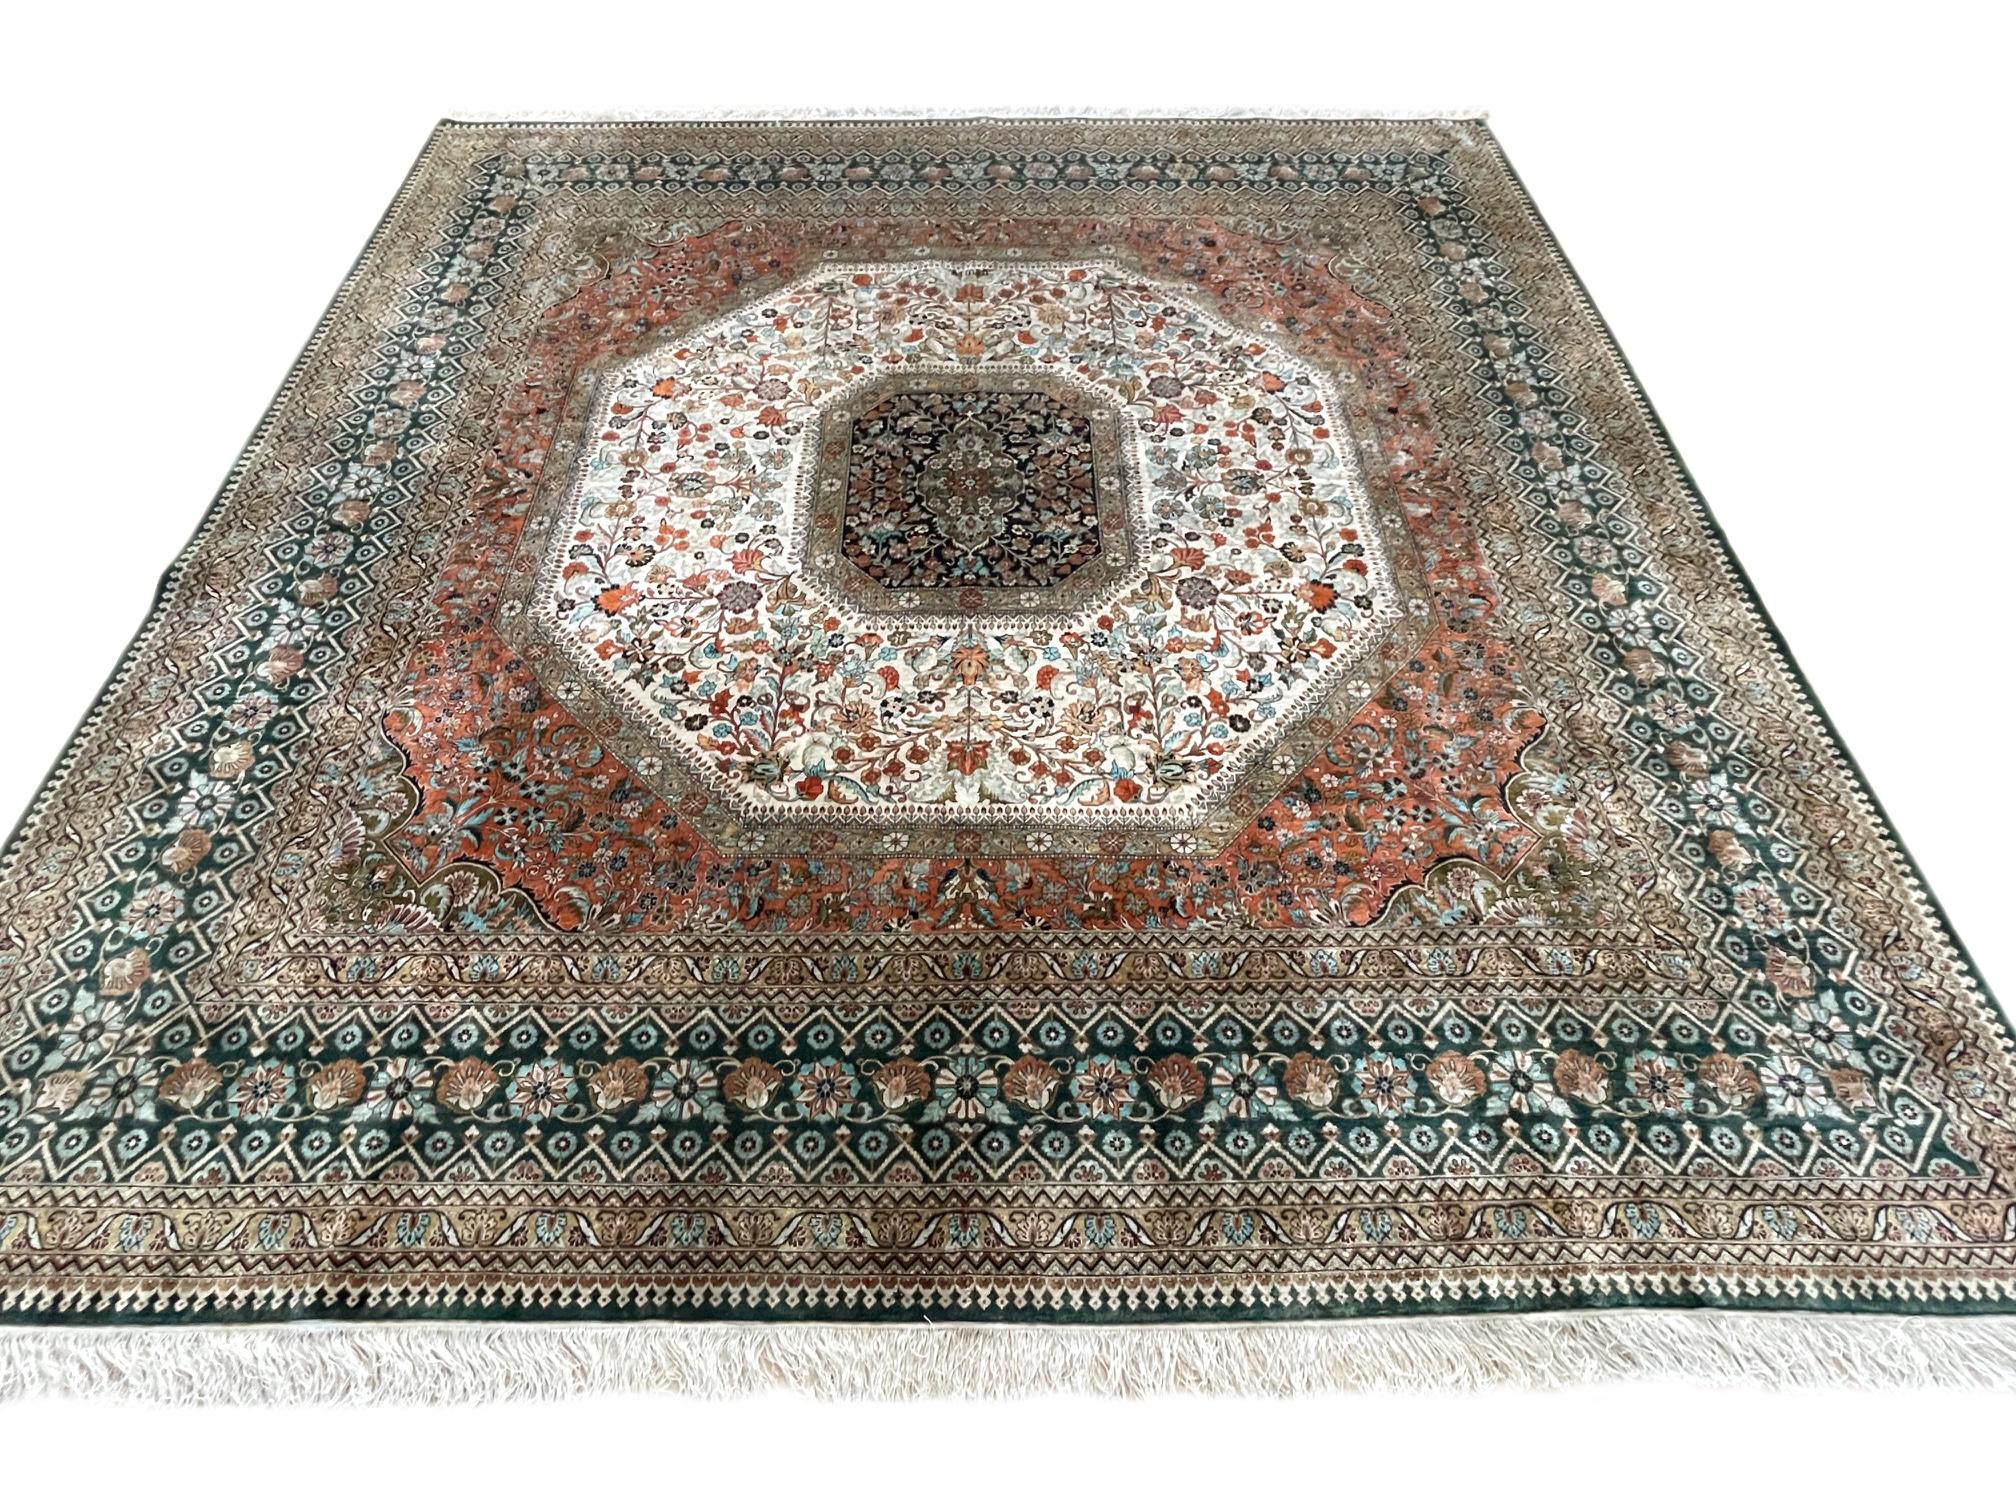 This rug is a hand woven Turkish has silk pile and silk foundation. Turkey is known as a wide variety of rugs on which it built its reputation as one of the world's most important weaving regions. This rug has a Bijar design with a semi-floral